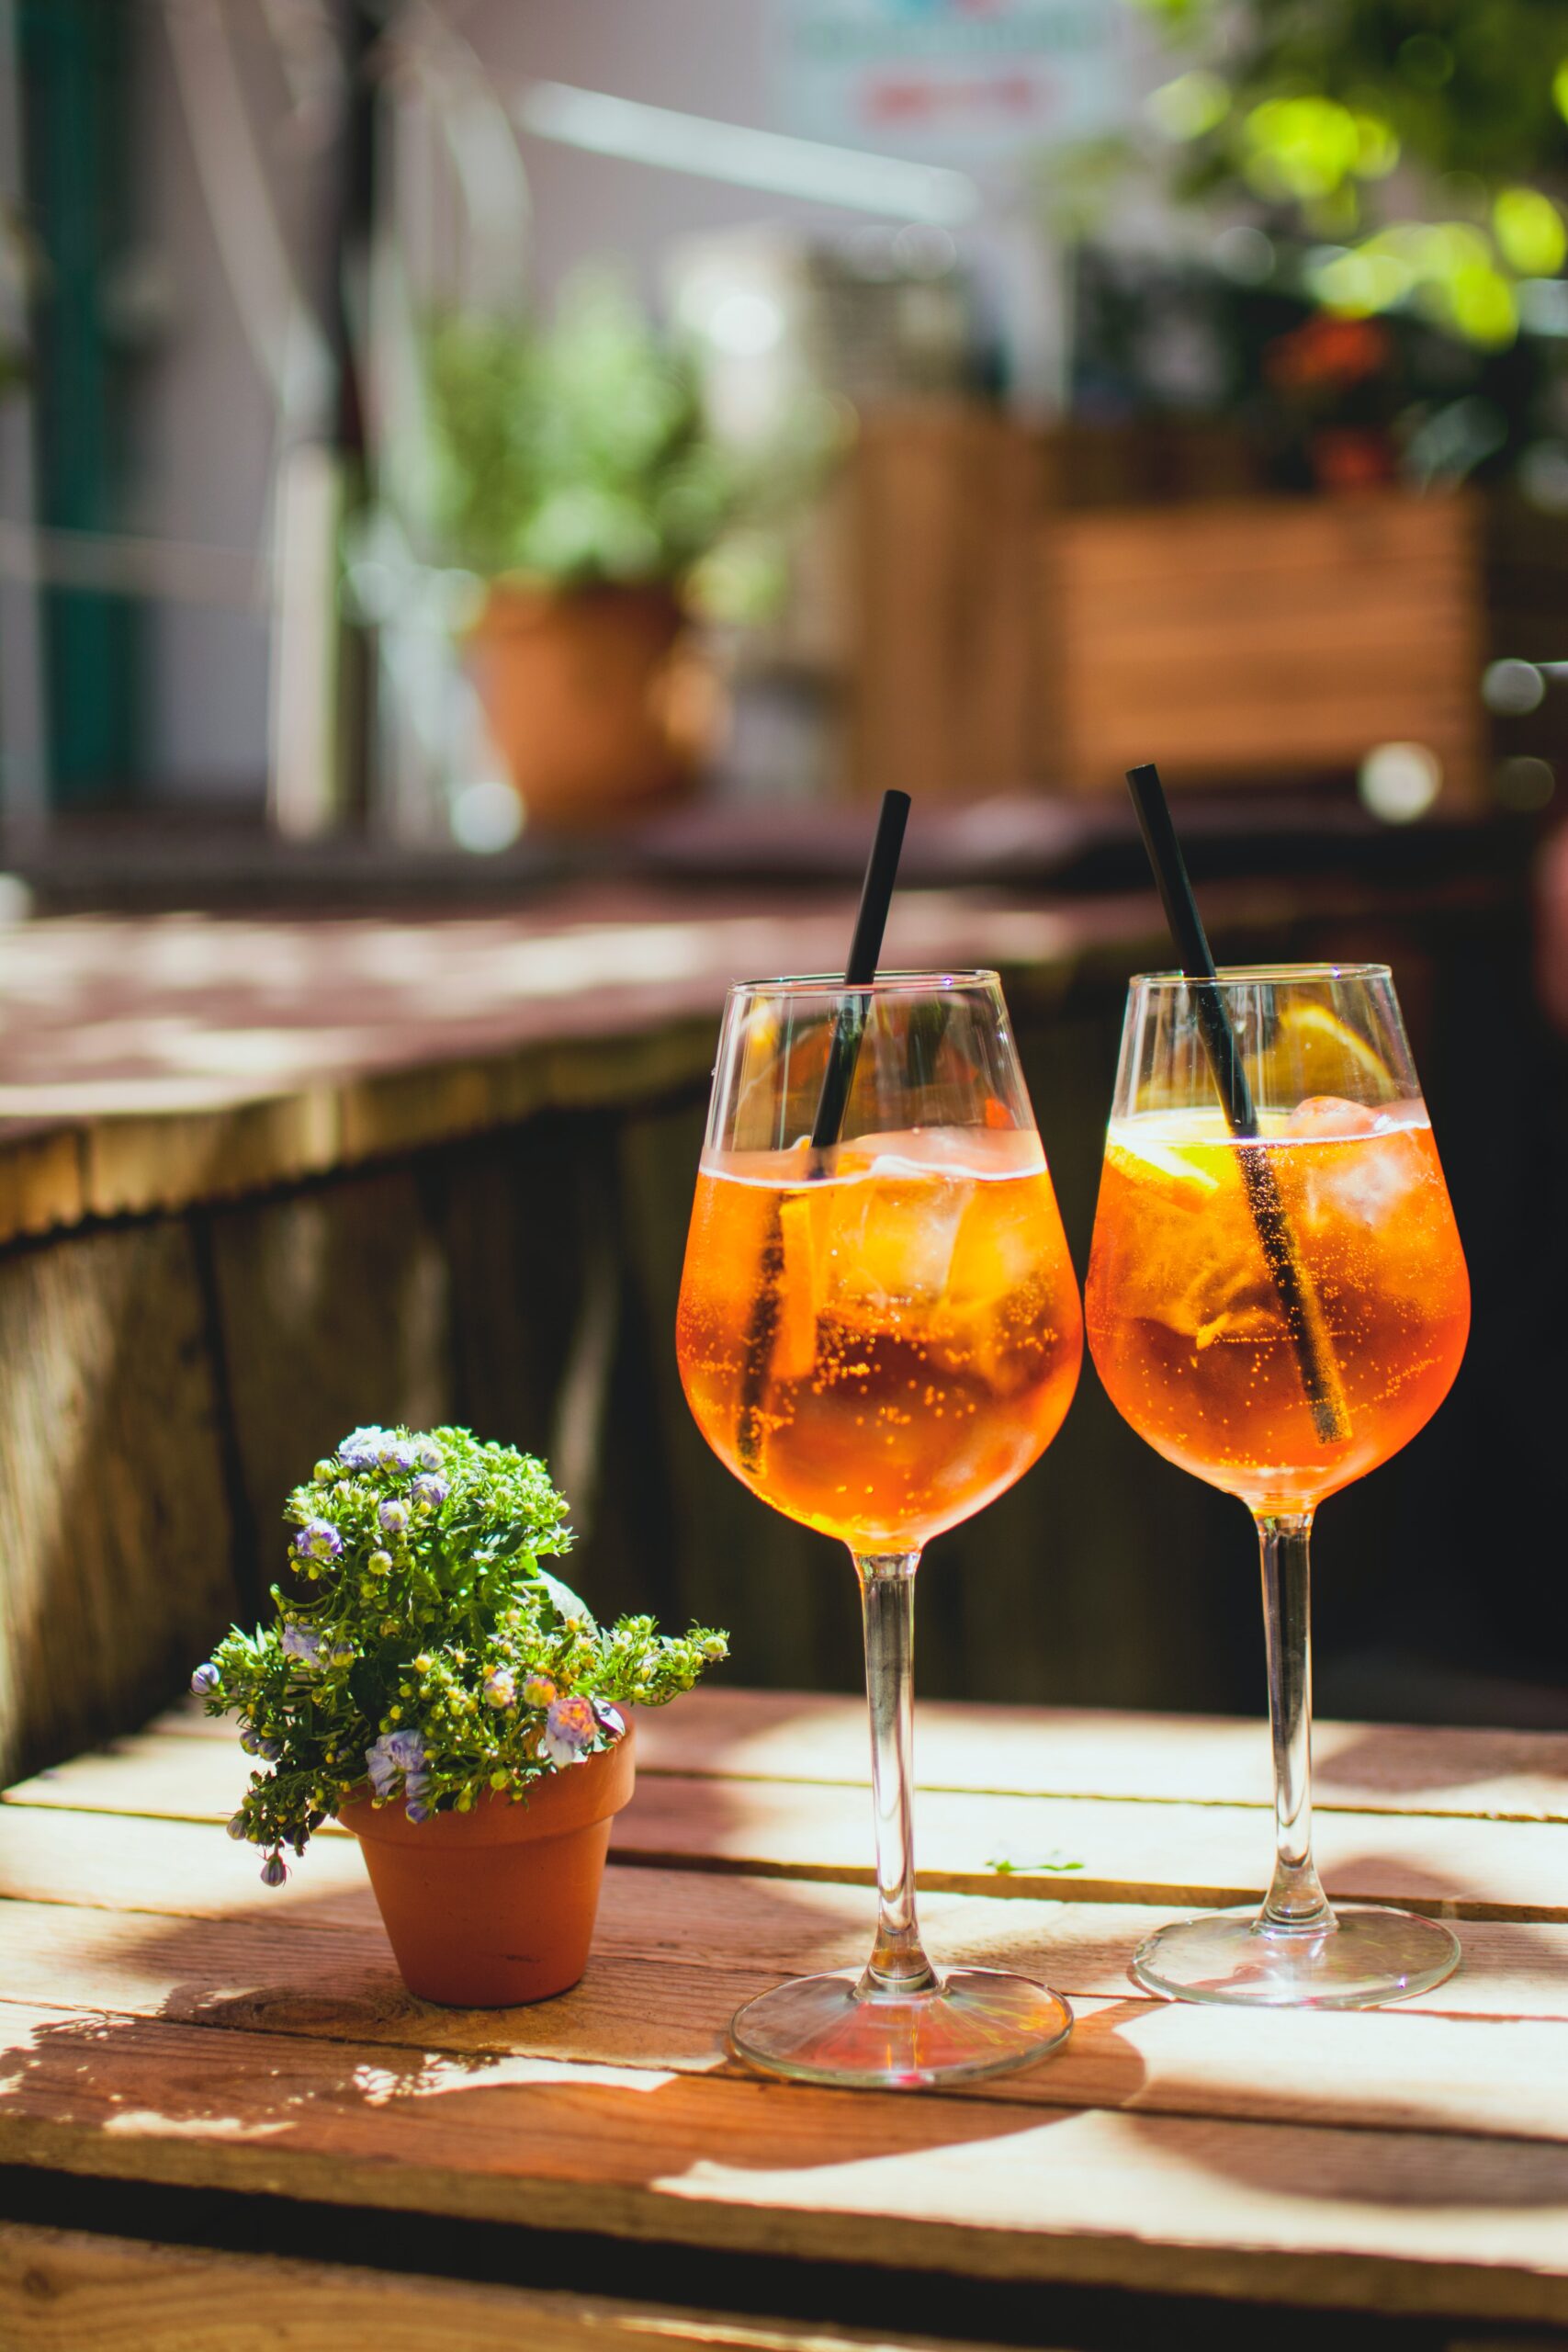 Two glasses of Aperol Spritz on a table with a small plant